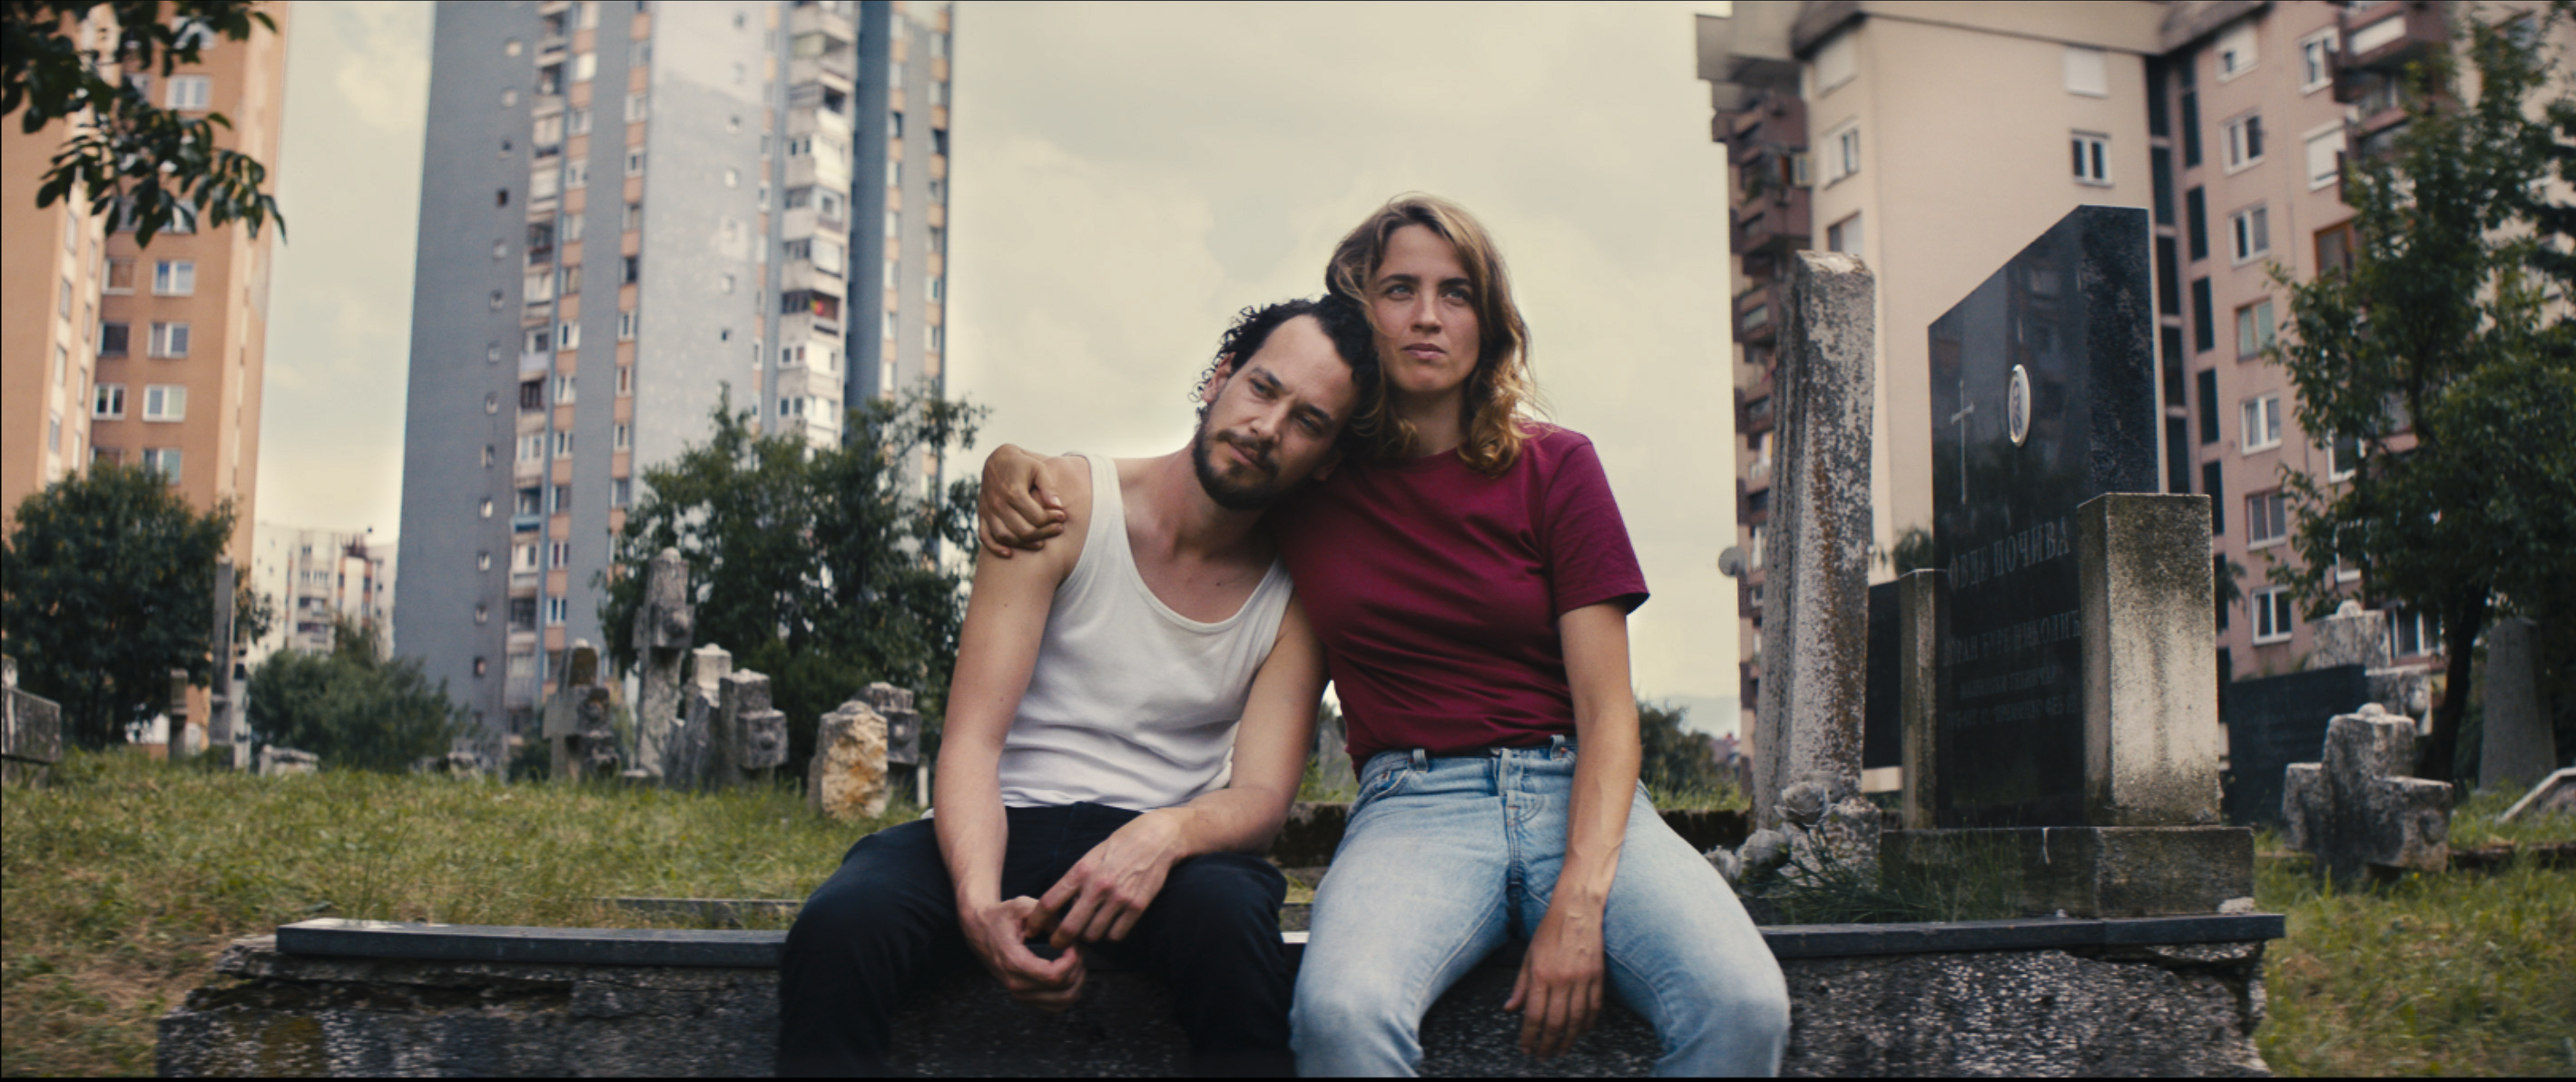 A still from &#039;Heroes Don&#039;t Die&#039; featuring  Adèle Haenel and Jonathan Couzinié